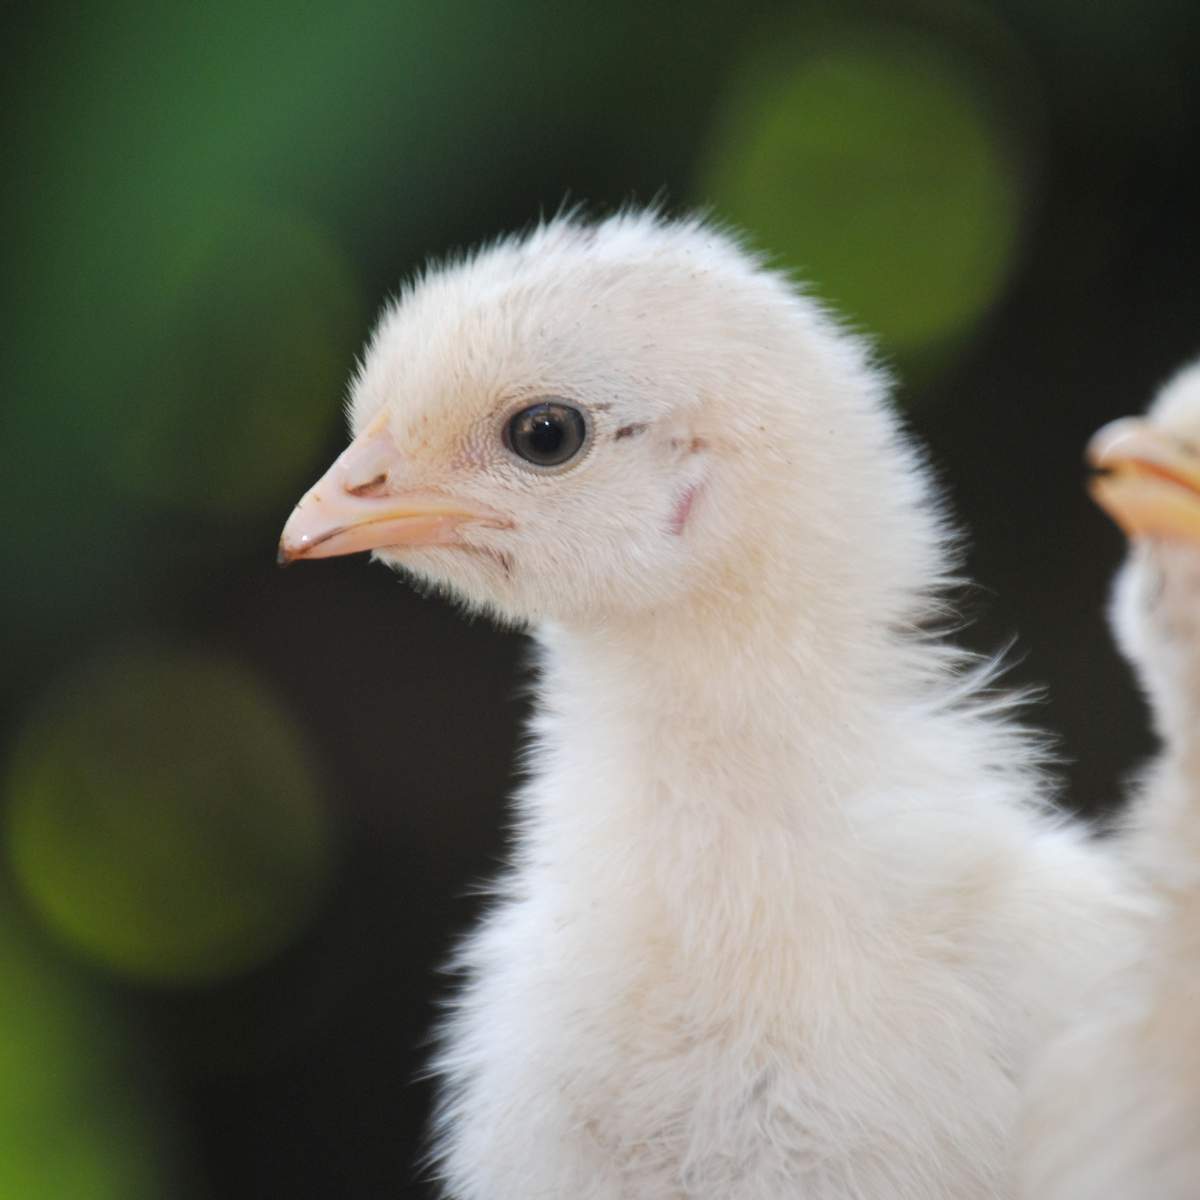 A cute baby turkey chick with soft fluffy feathers.